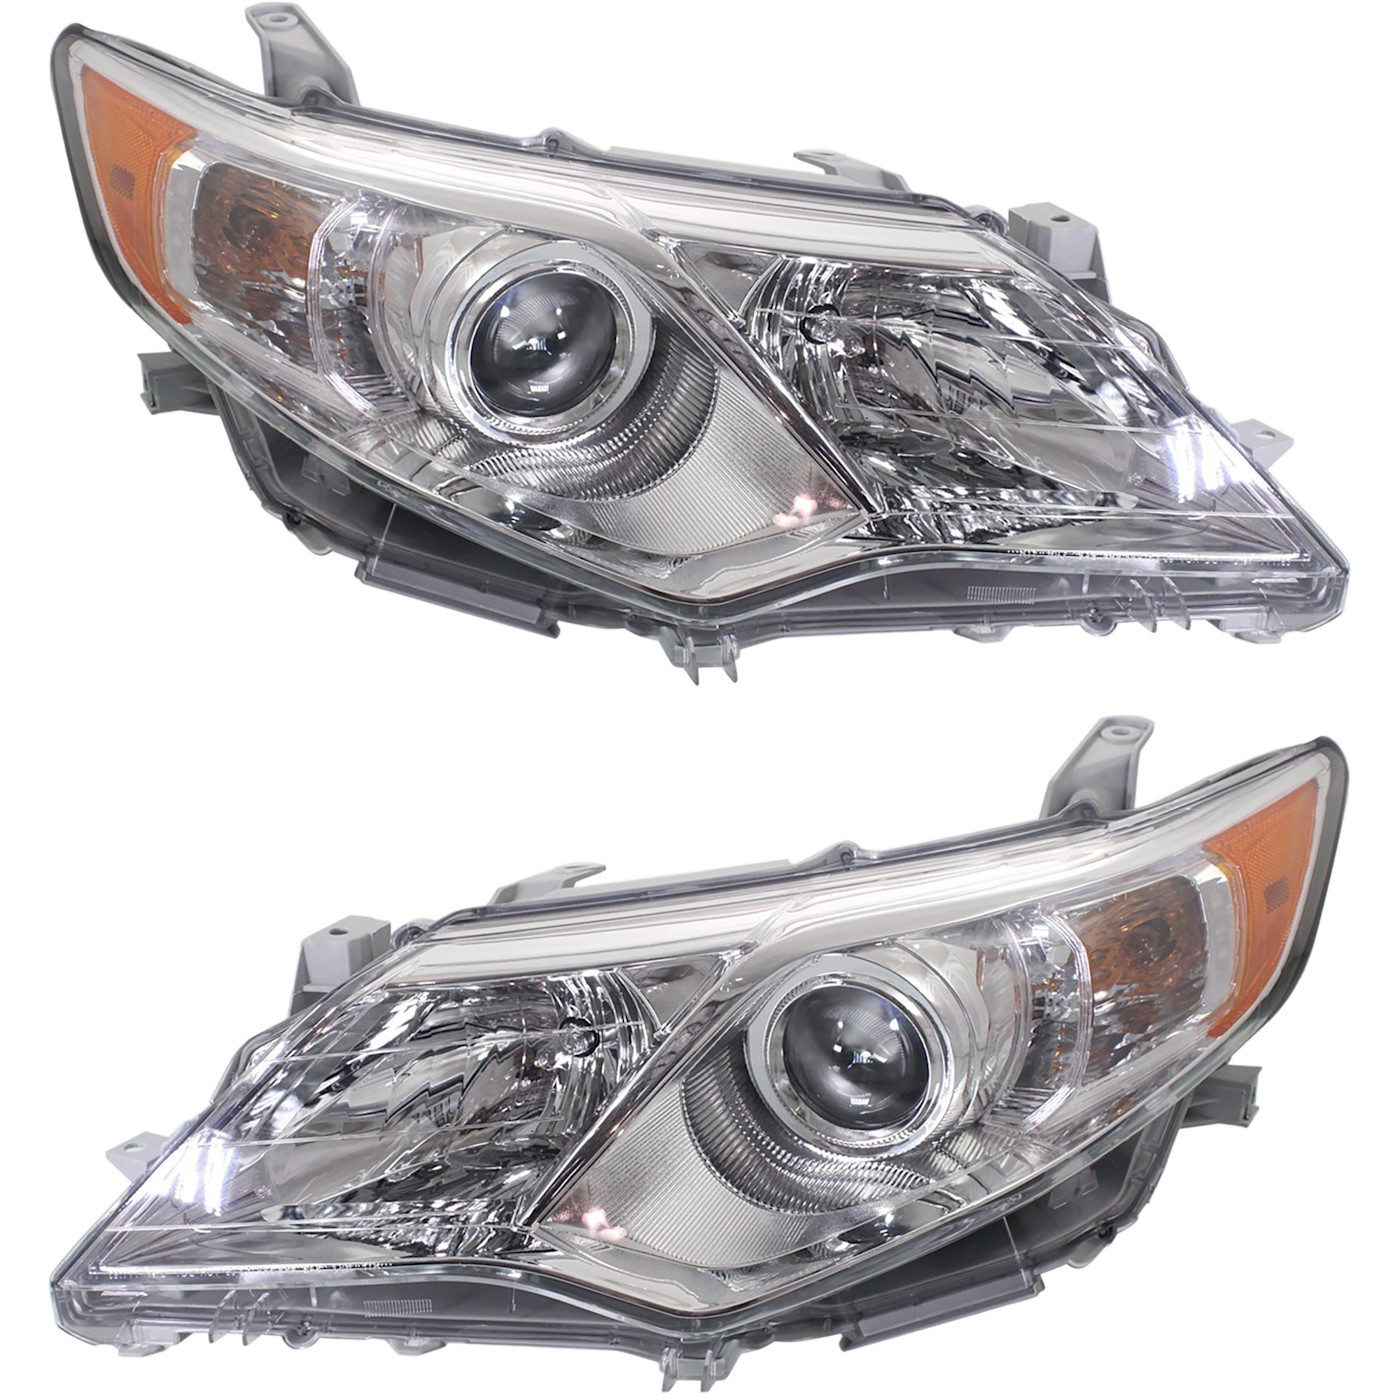 For 2012-2014 Toyota Camry Projector Headlights Headlamps Replacement ...